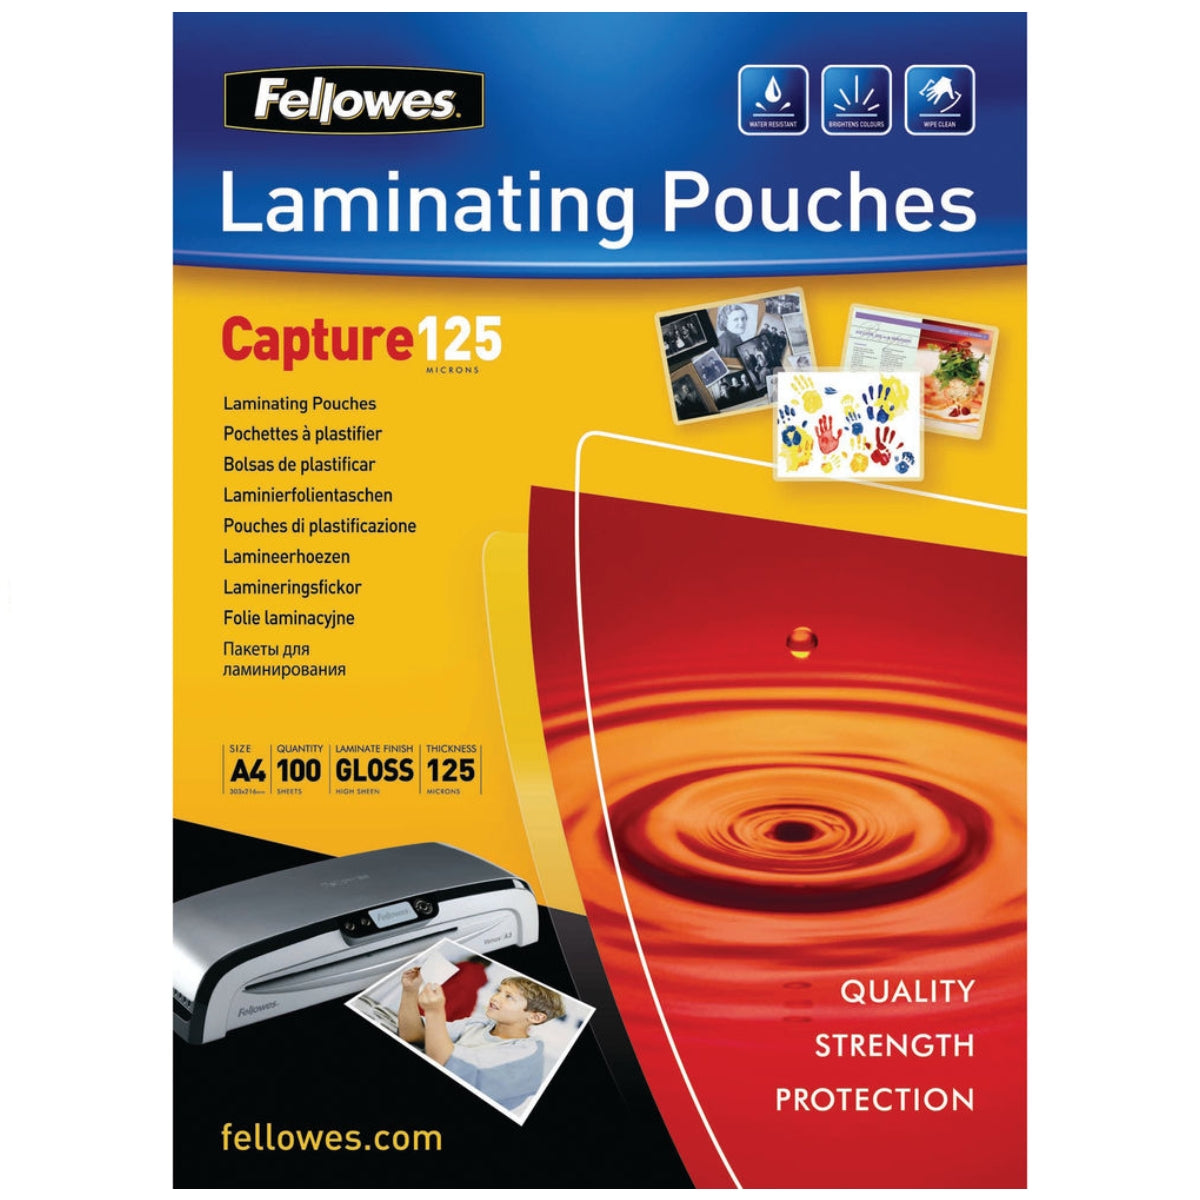 Fellowes A3 Laminating Pouches Capture125, 303x426mm, 100/pack